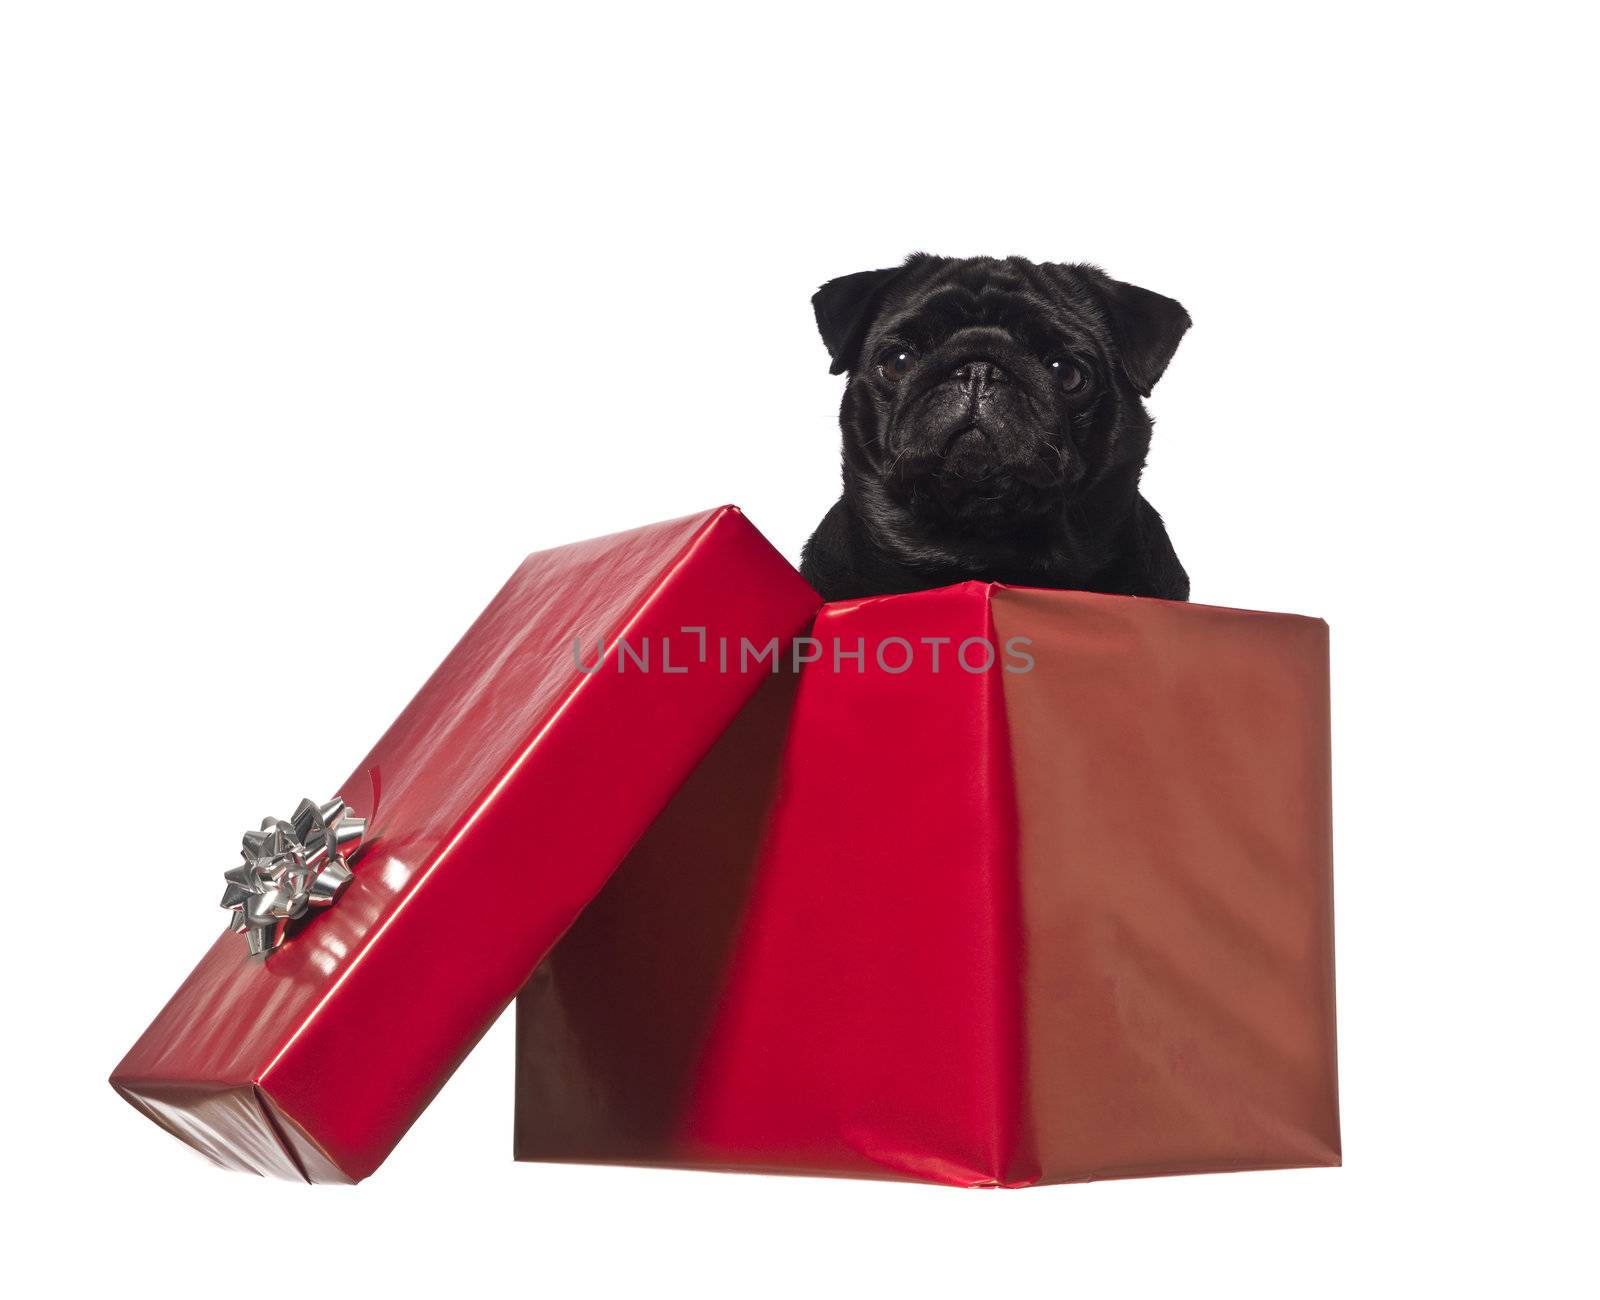 Dog in a gift box isolated on white